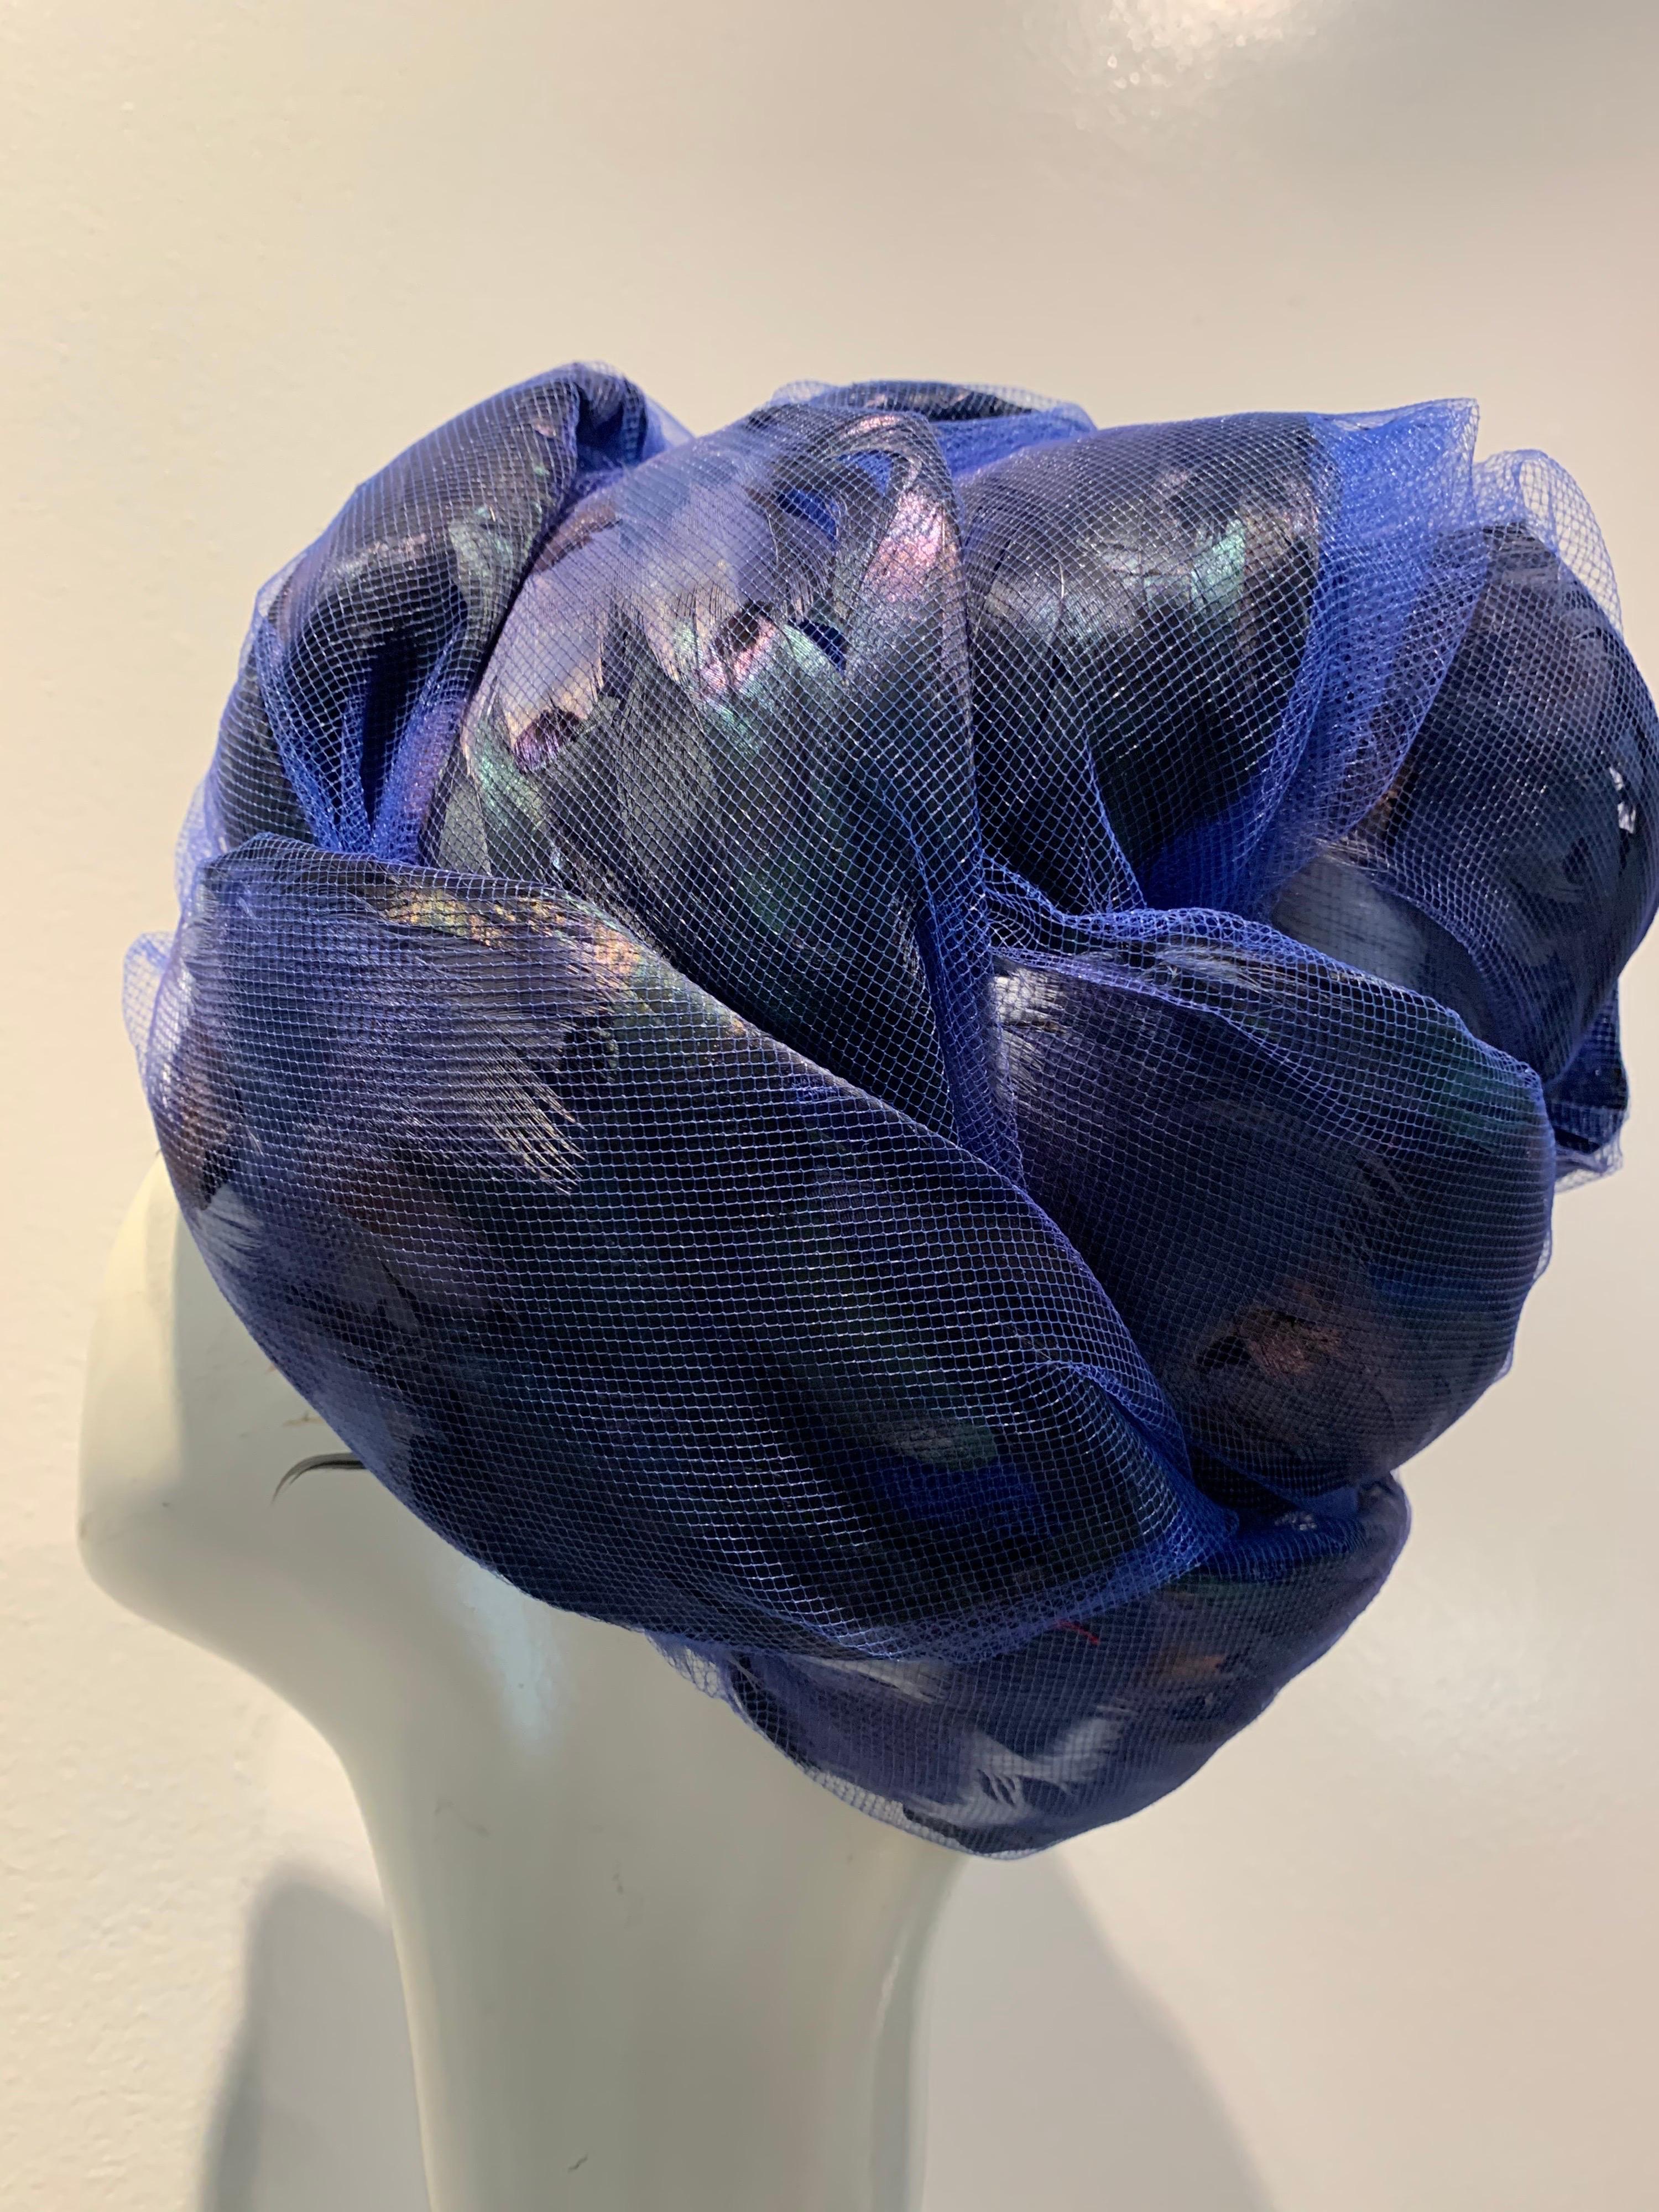 1960s Christian Dior cobalt tulle and feather beehive shaped turban-style hat.  Feathers are iridescent black, blue and pale blue arranged in petal shapes encased in tulle. Size Medium 